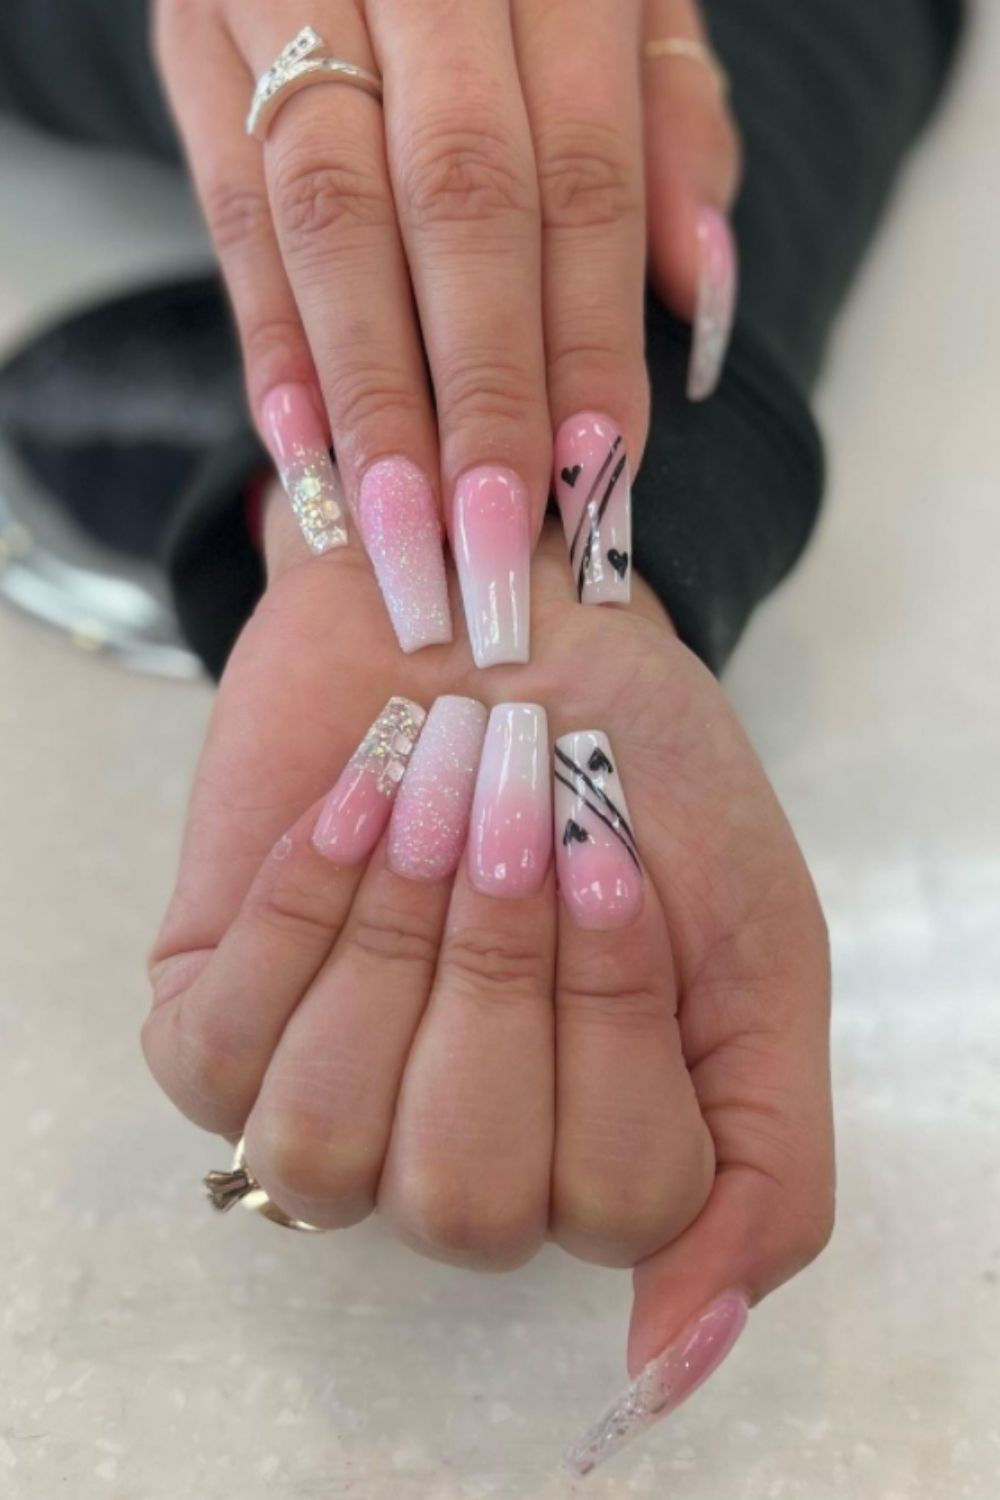 Pink and white coffin nail art designs of 2022 with small heart